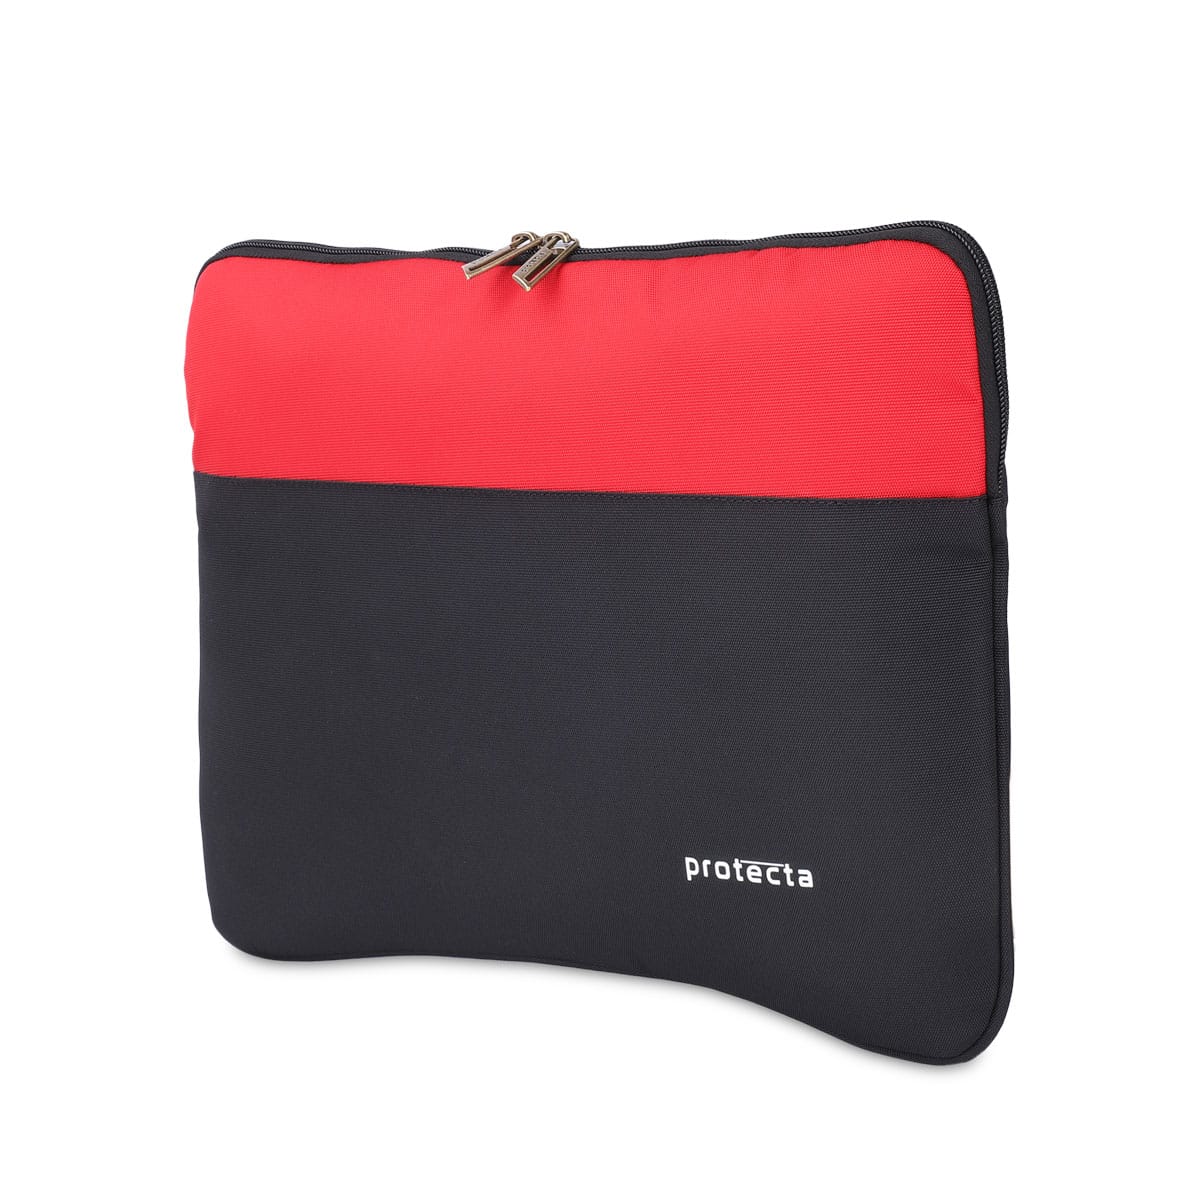 Laptop Cases - Cases, Bags & Protection